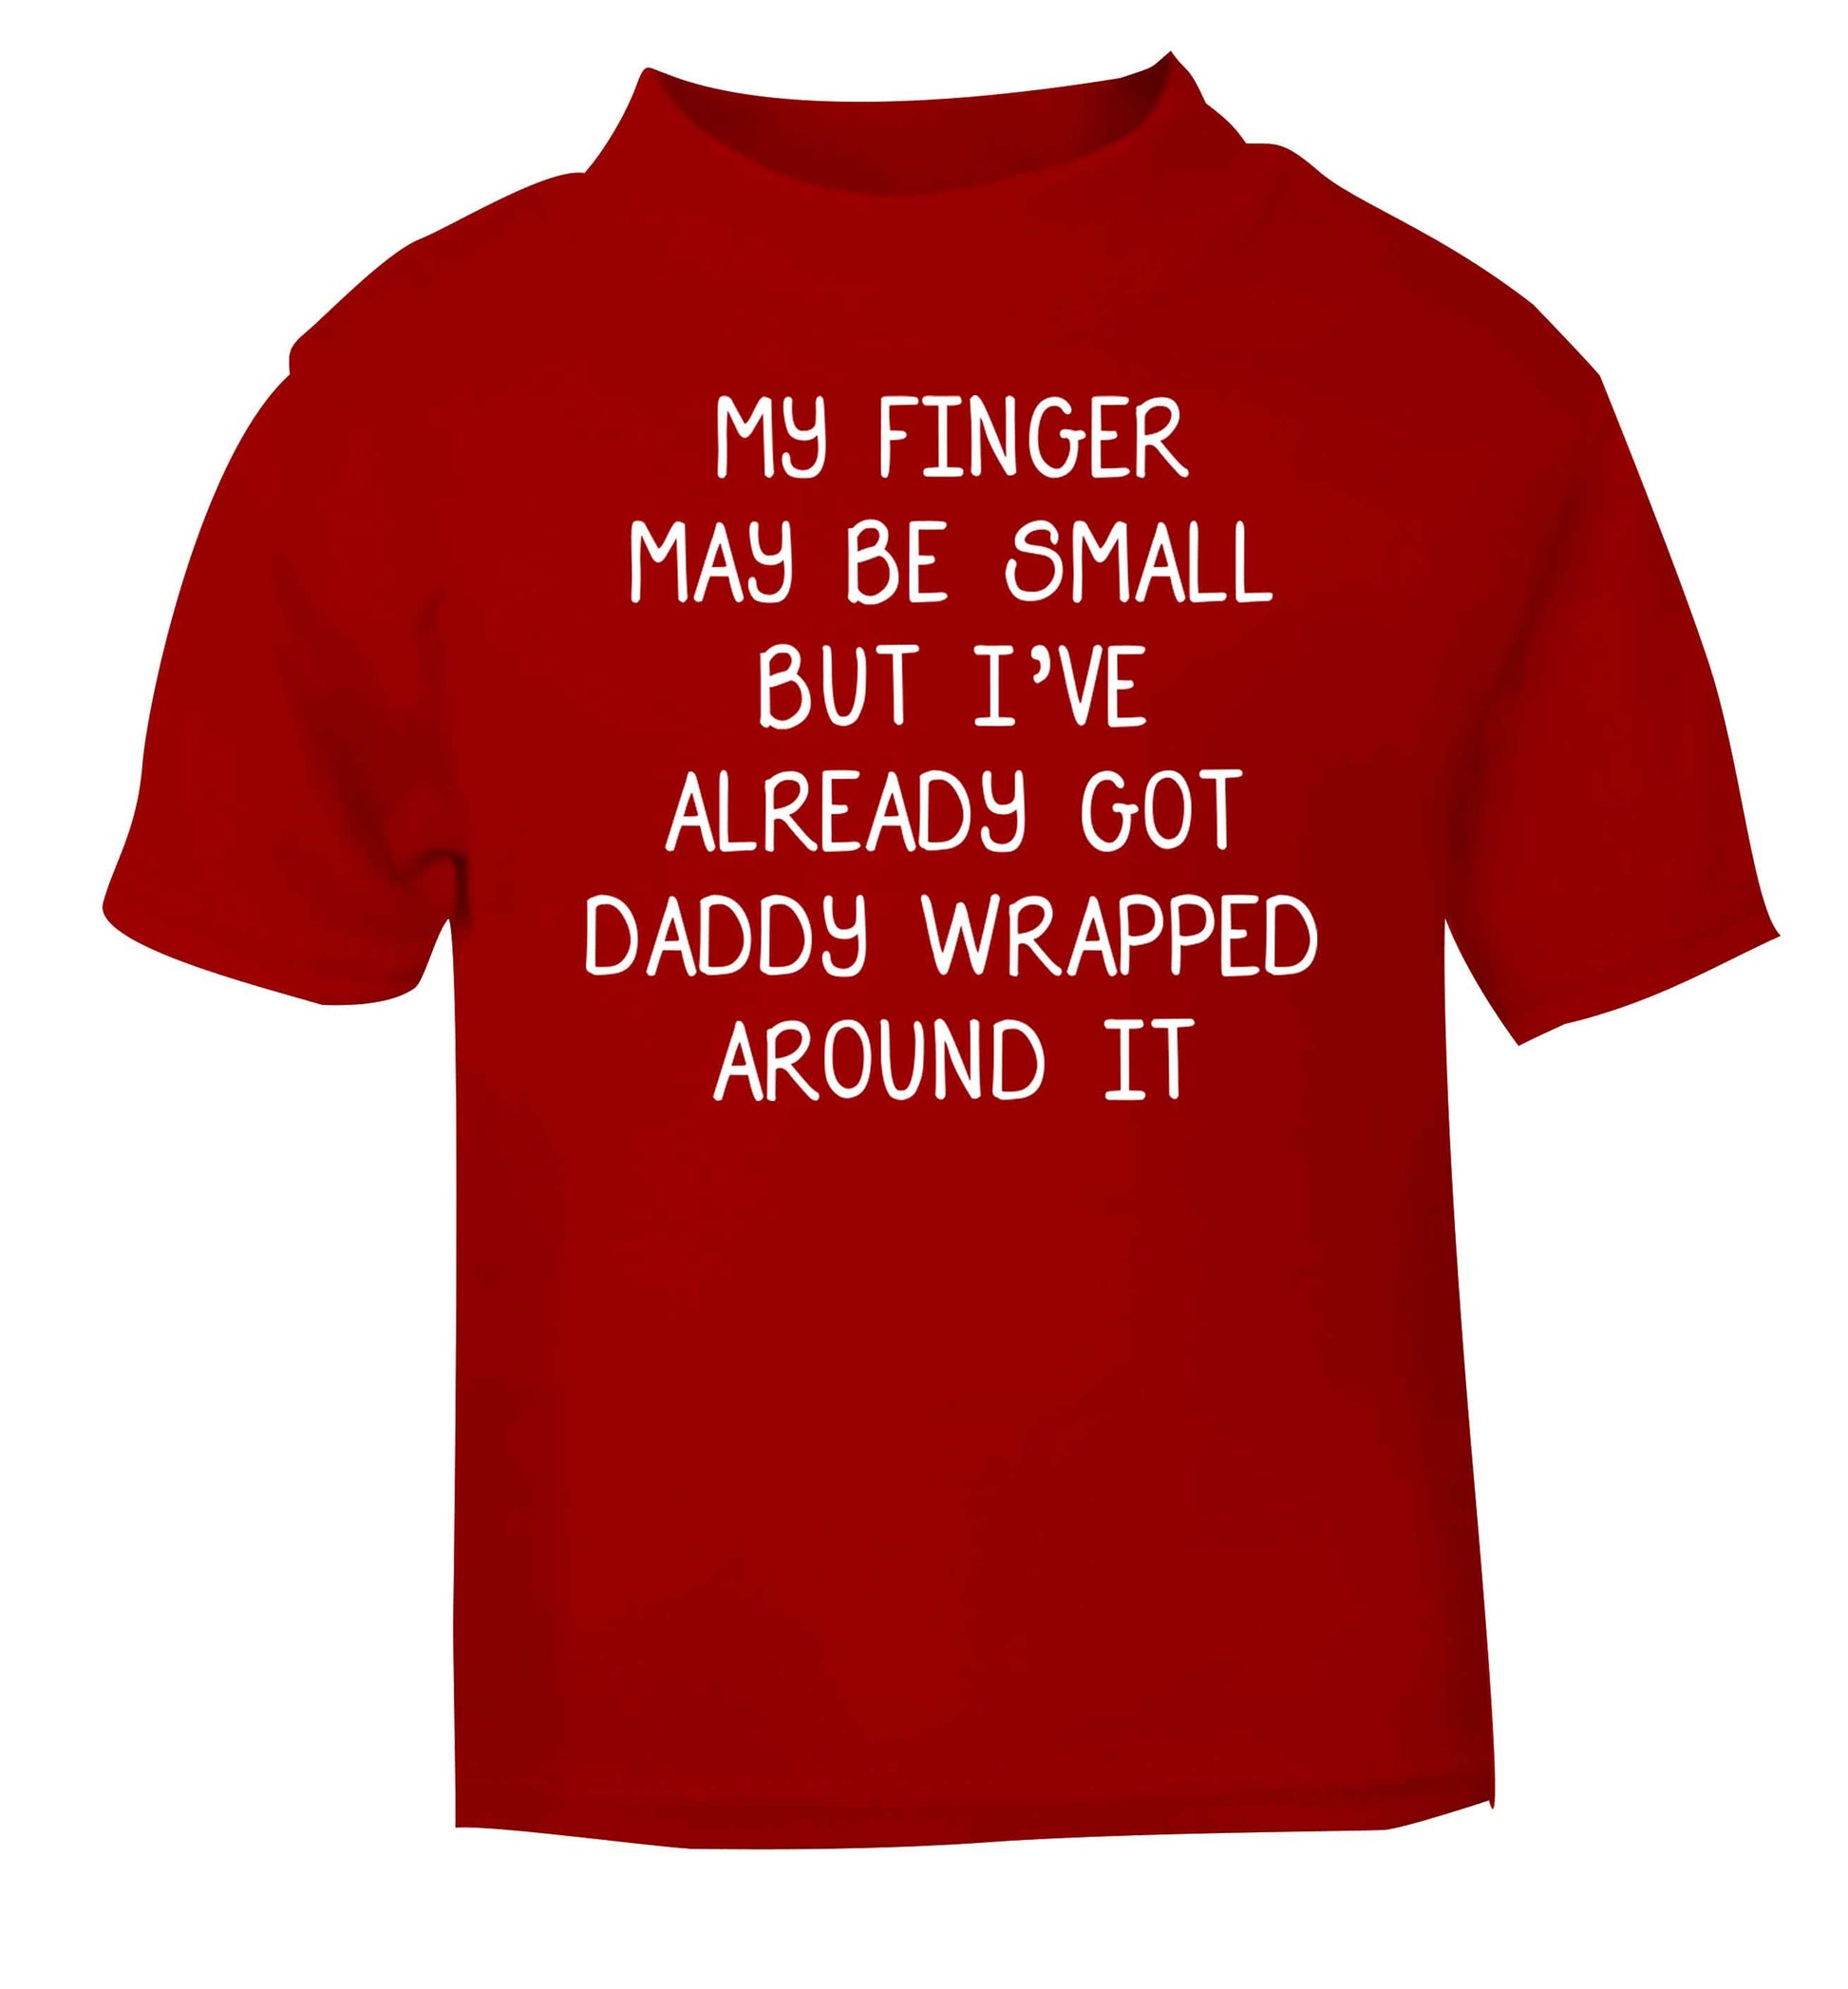 My finger may be small but I've already got daddy wrapped around it red baby toddler Tshirt 2 Years